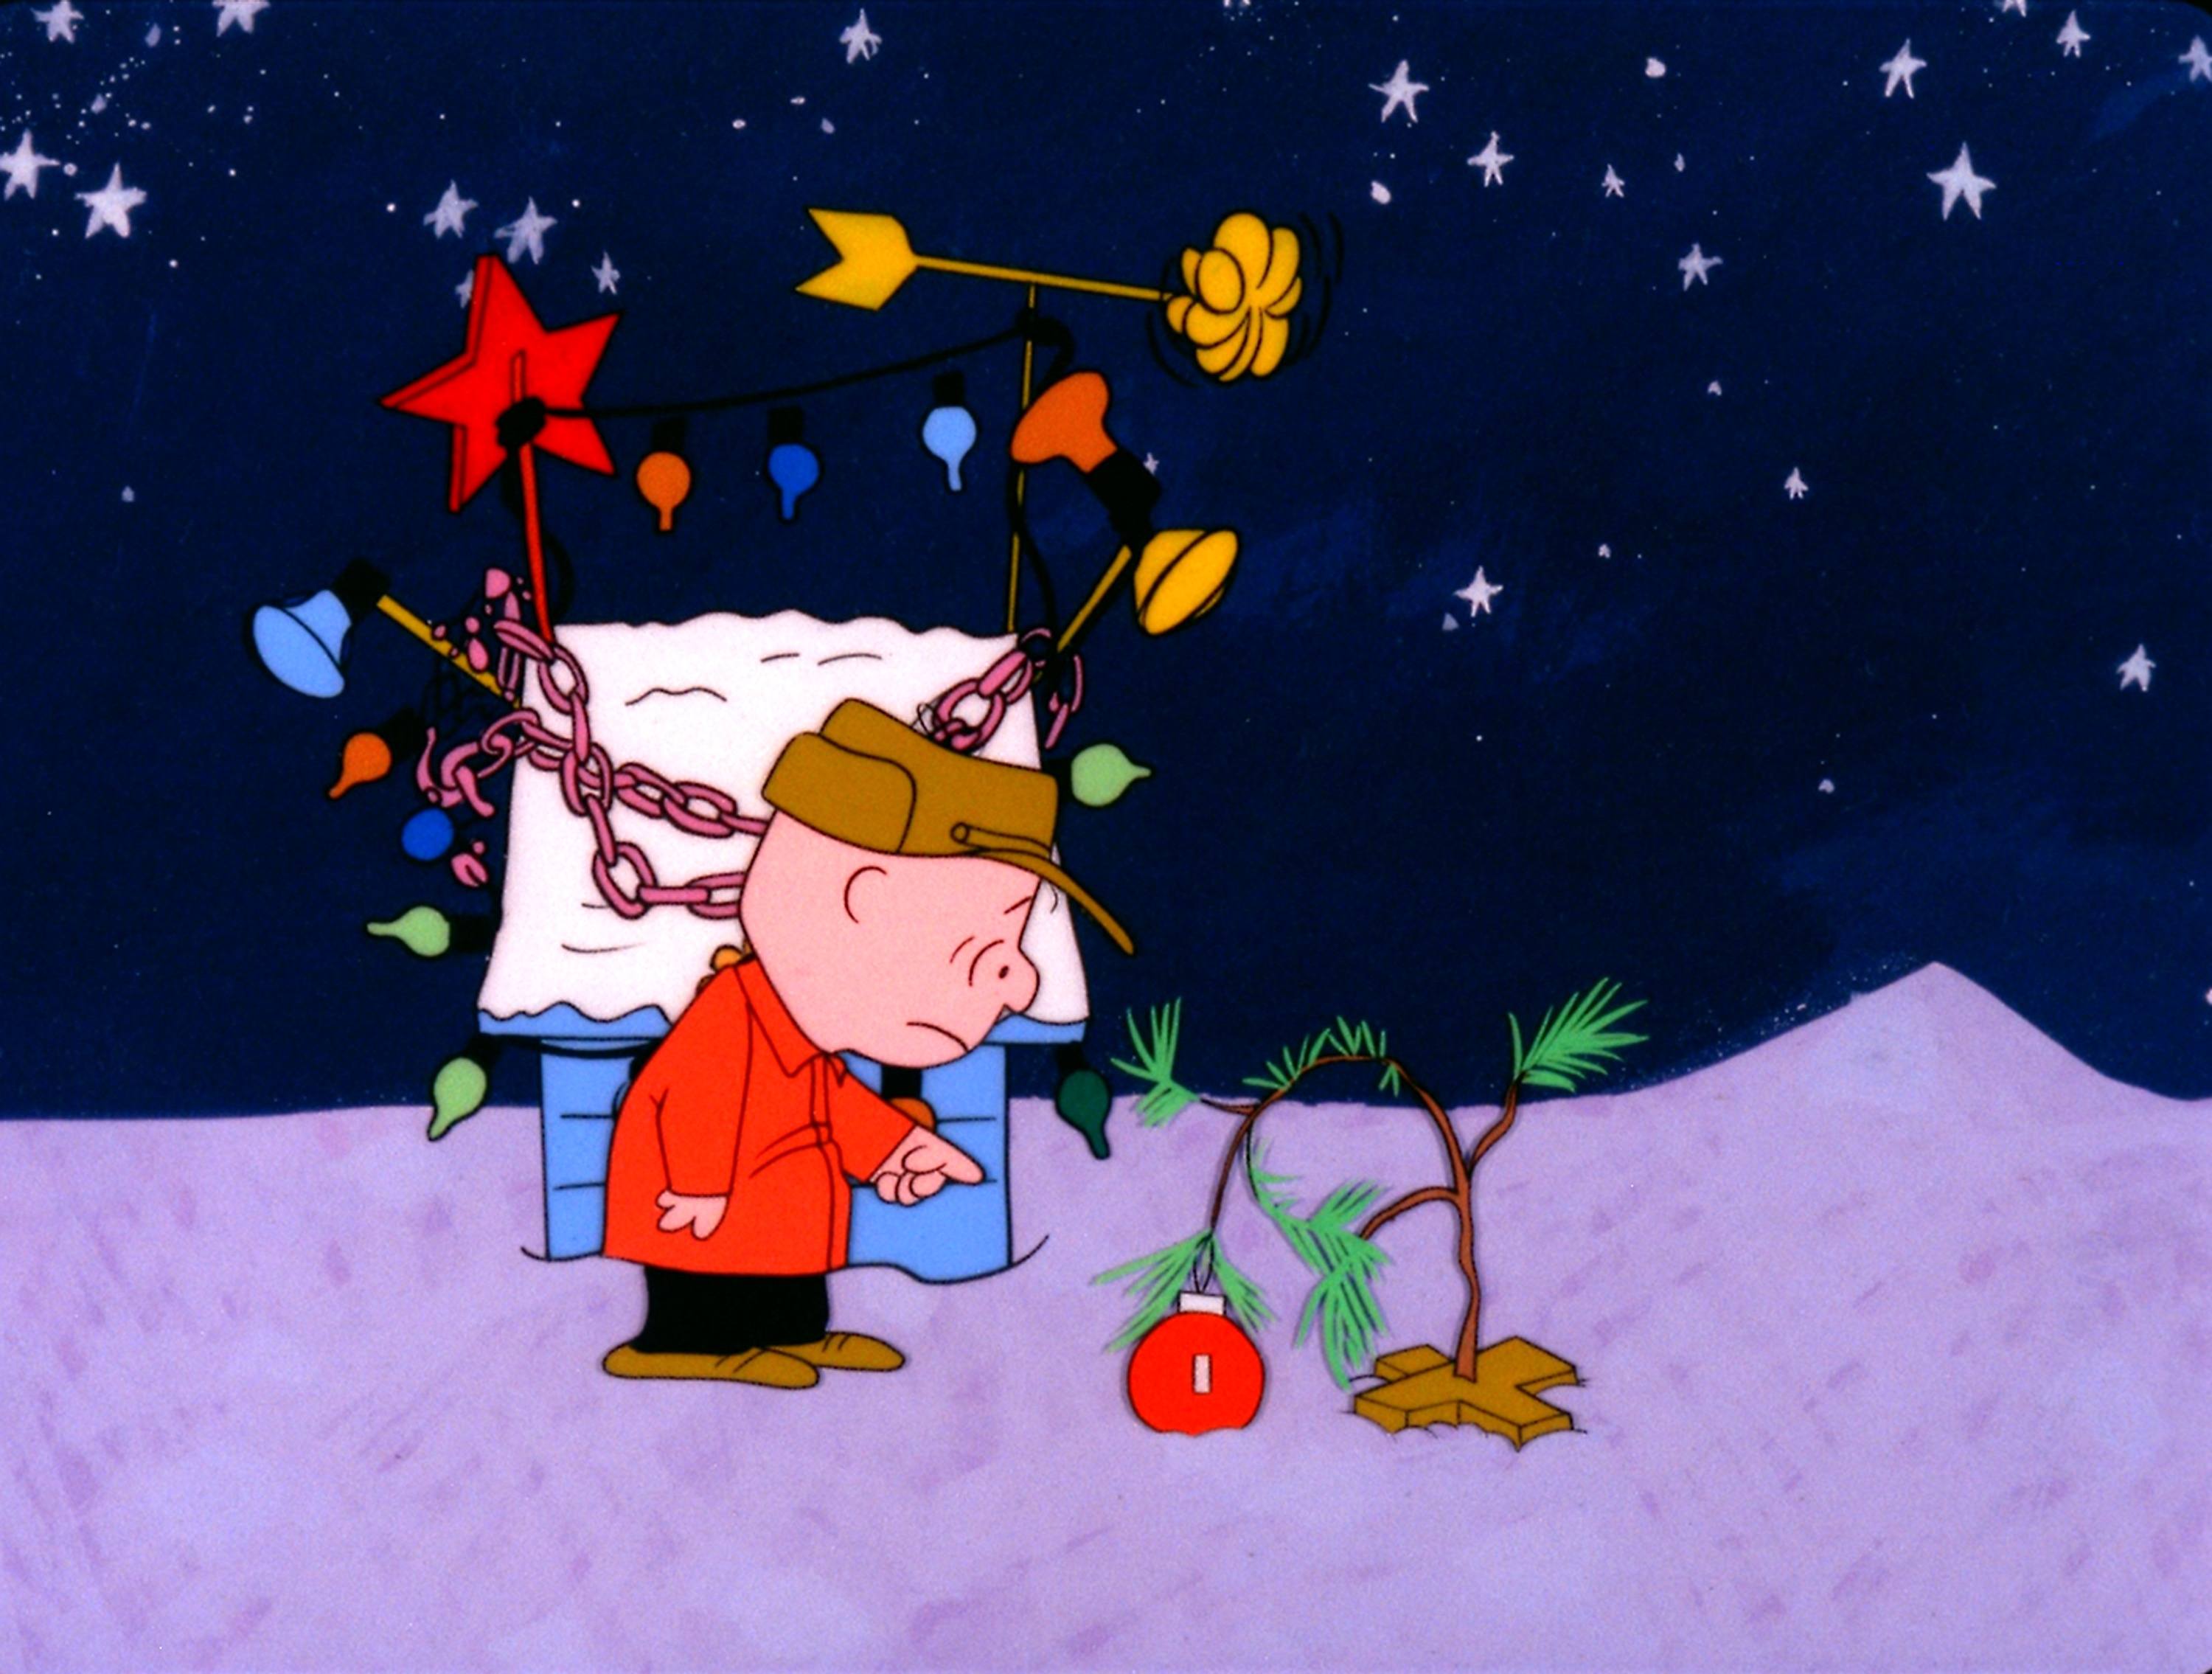 Where Can You Buy a Charlie Brown Christmas Tree This Year?